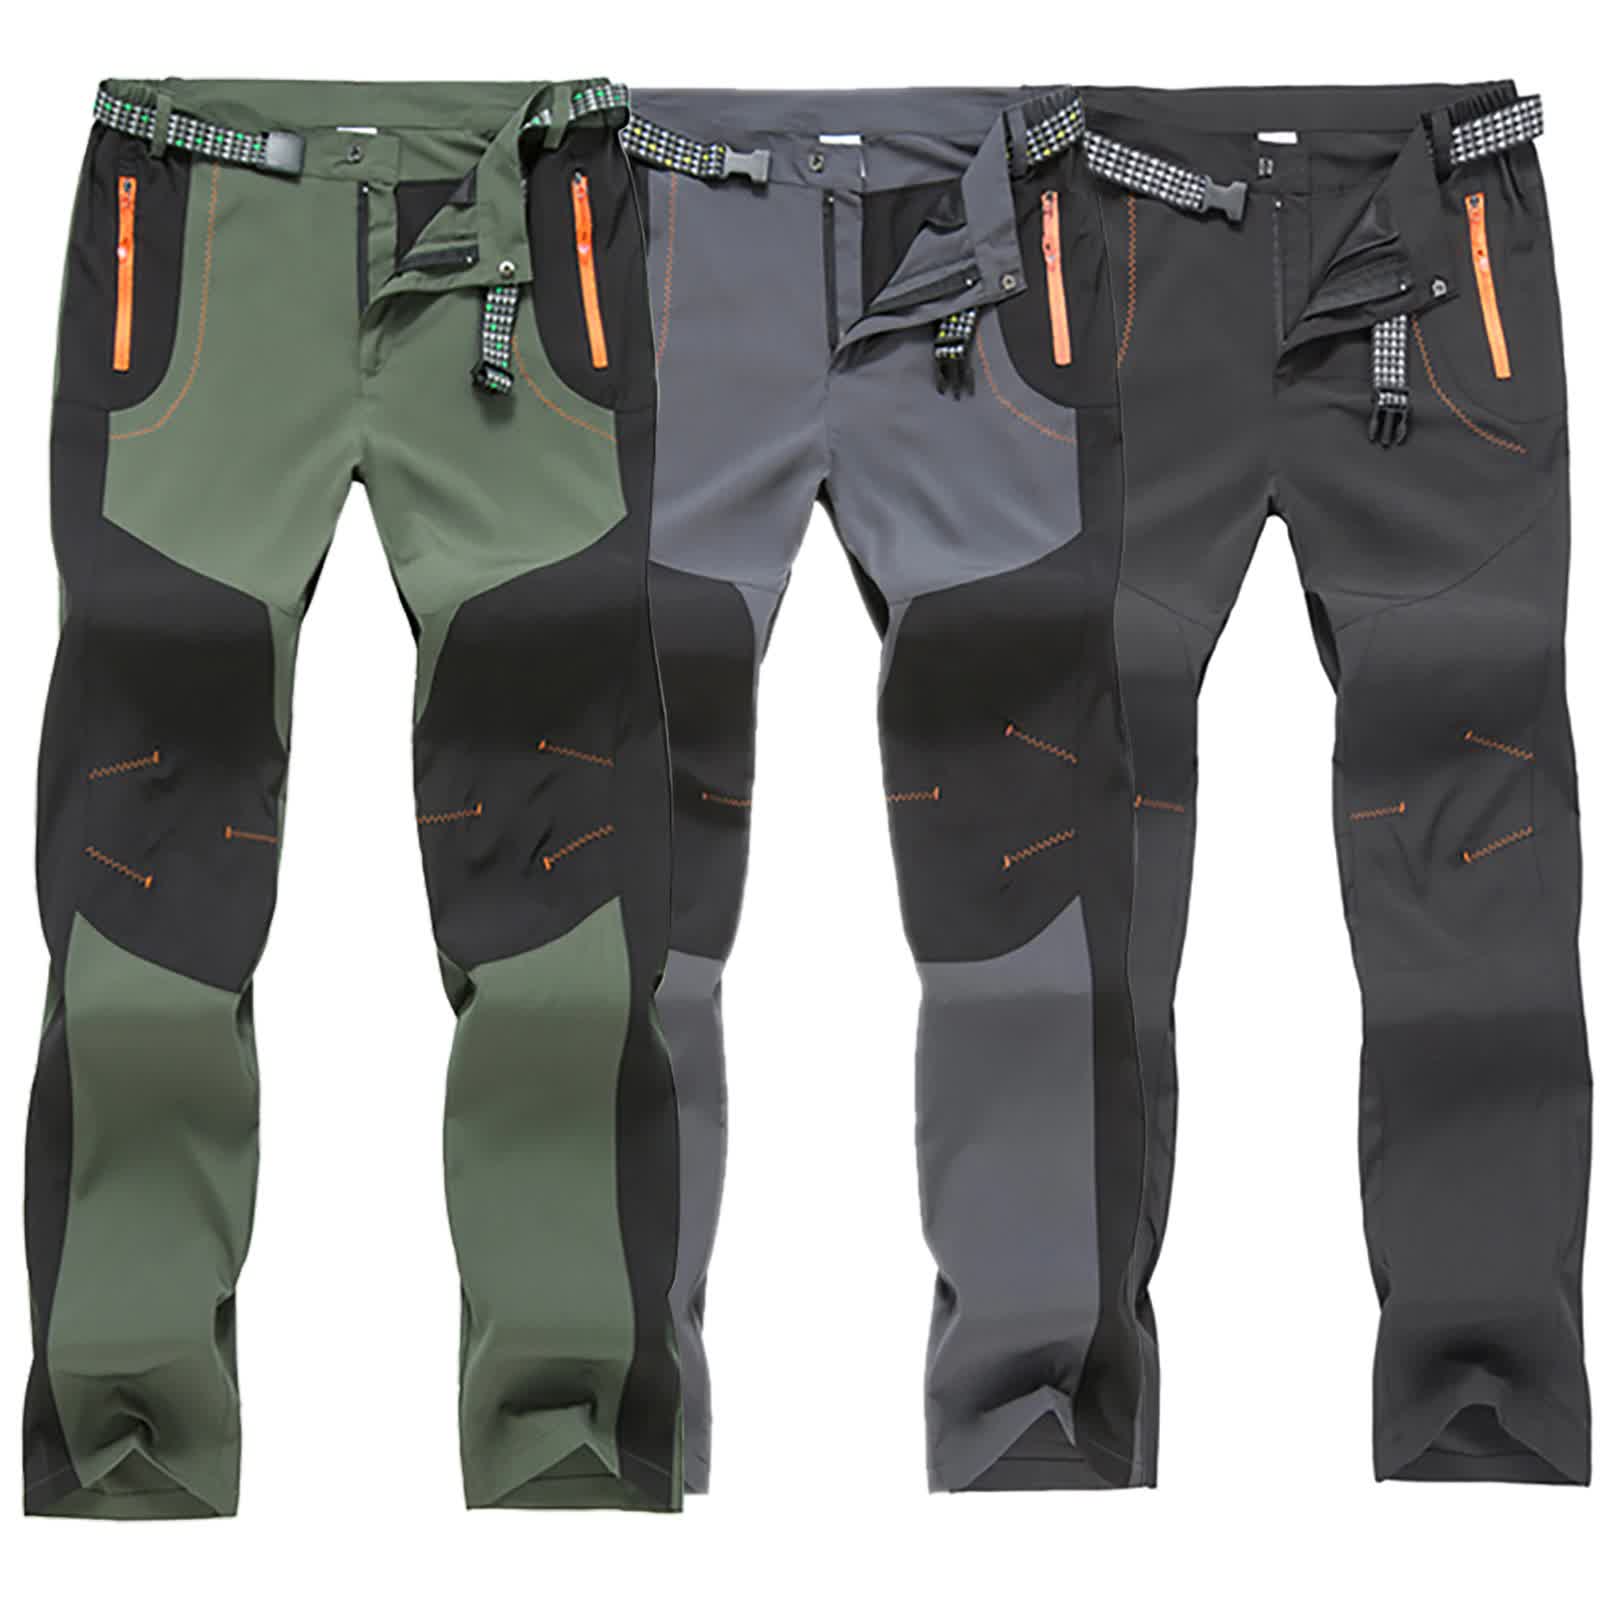 Men's Clothing Pants Casual Army Military Sports Hiking Outdoors Summer Sports Pants Camping Trousers